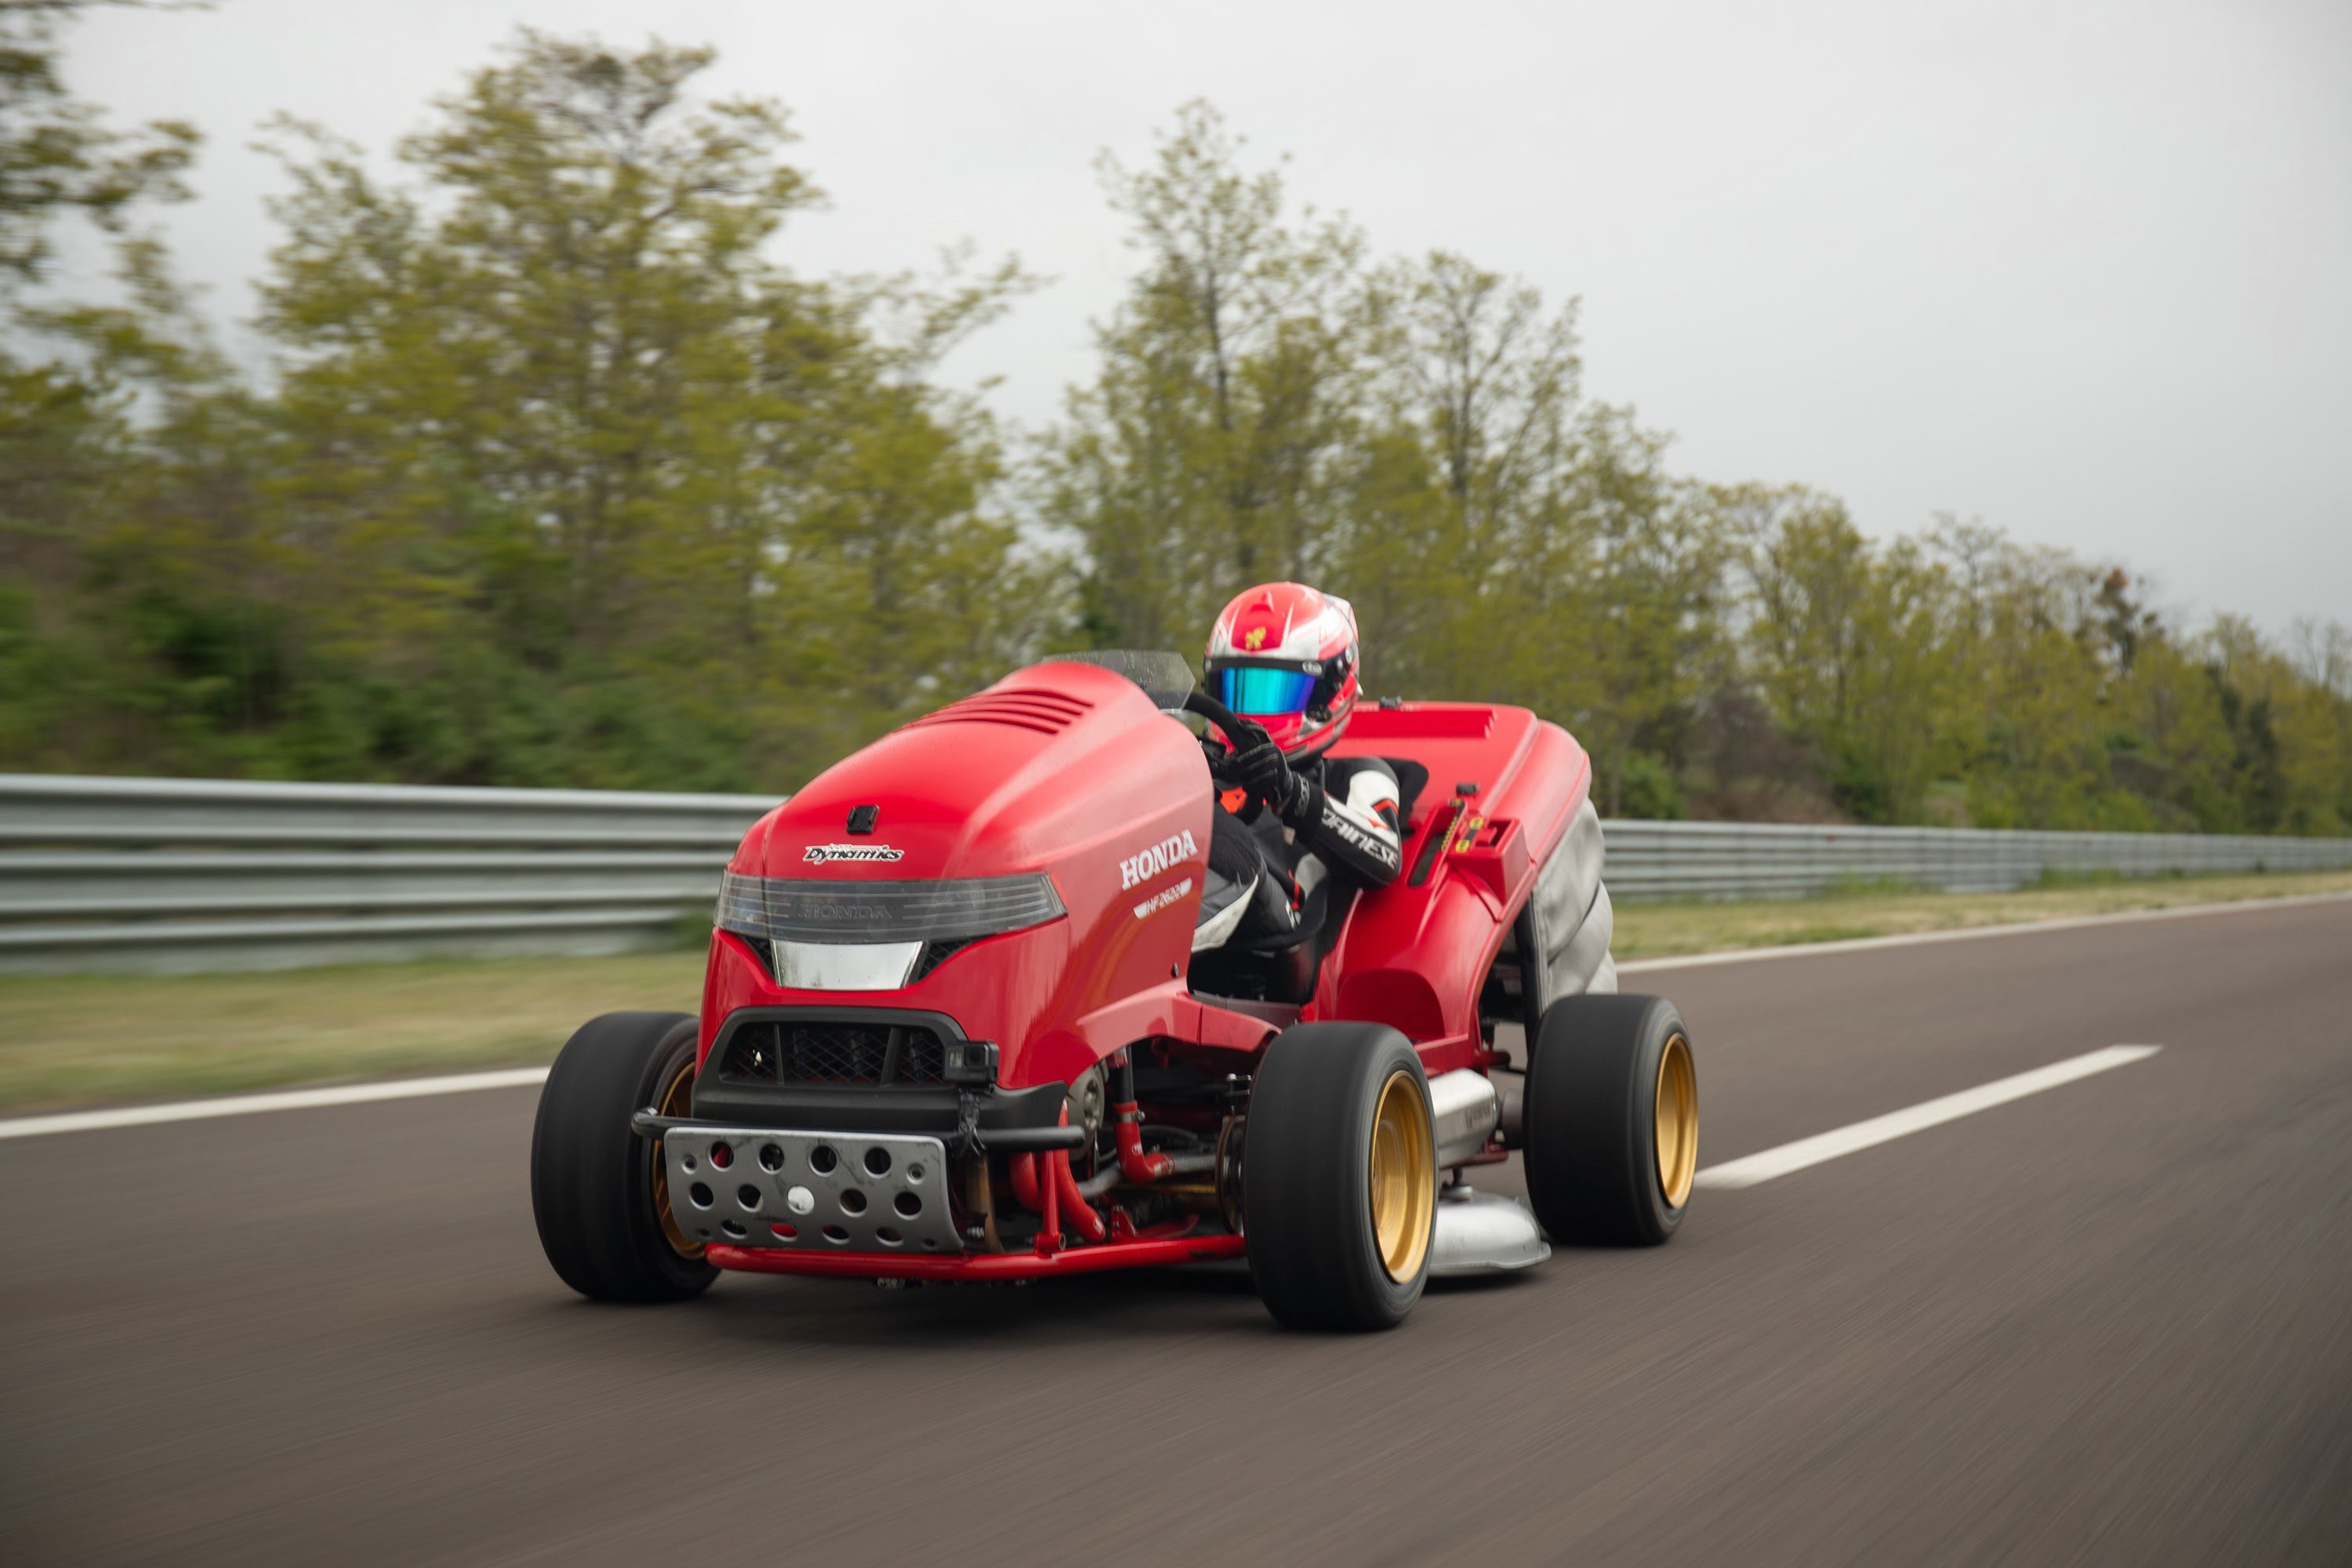 Honda’s Mean Mower sets a new GUINNESS WORLD RECORDS® title #MeanMower